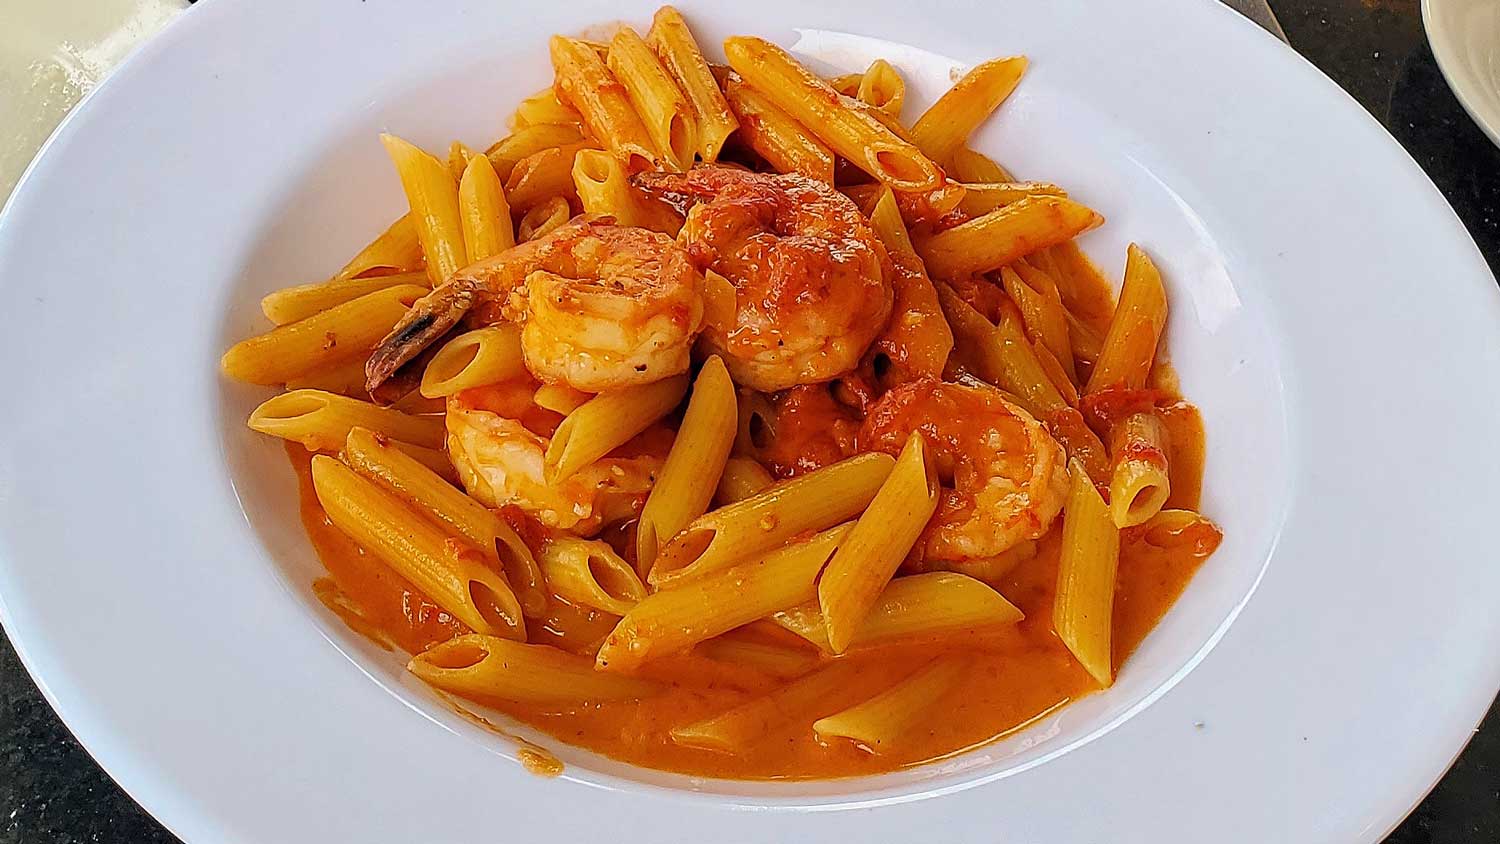 Penne with shrimp in red sauce.